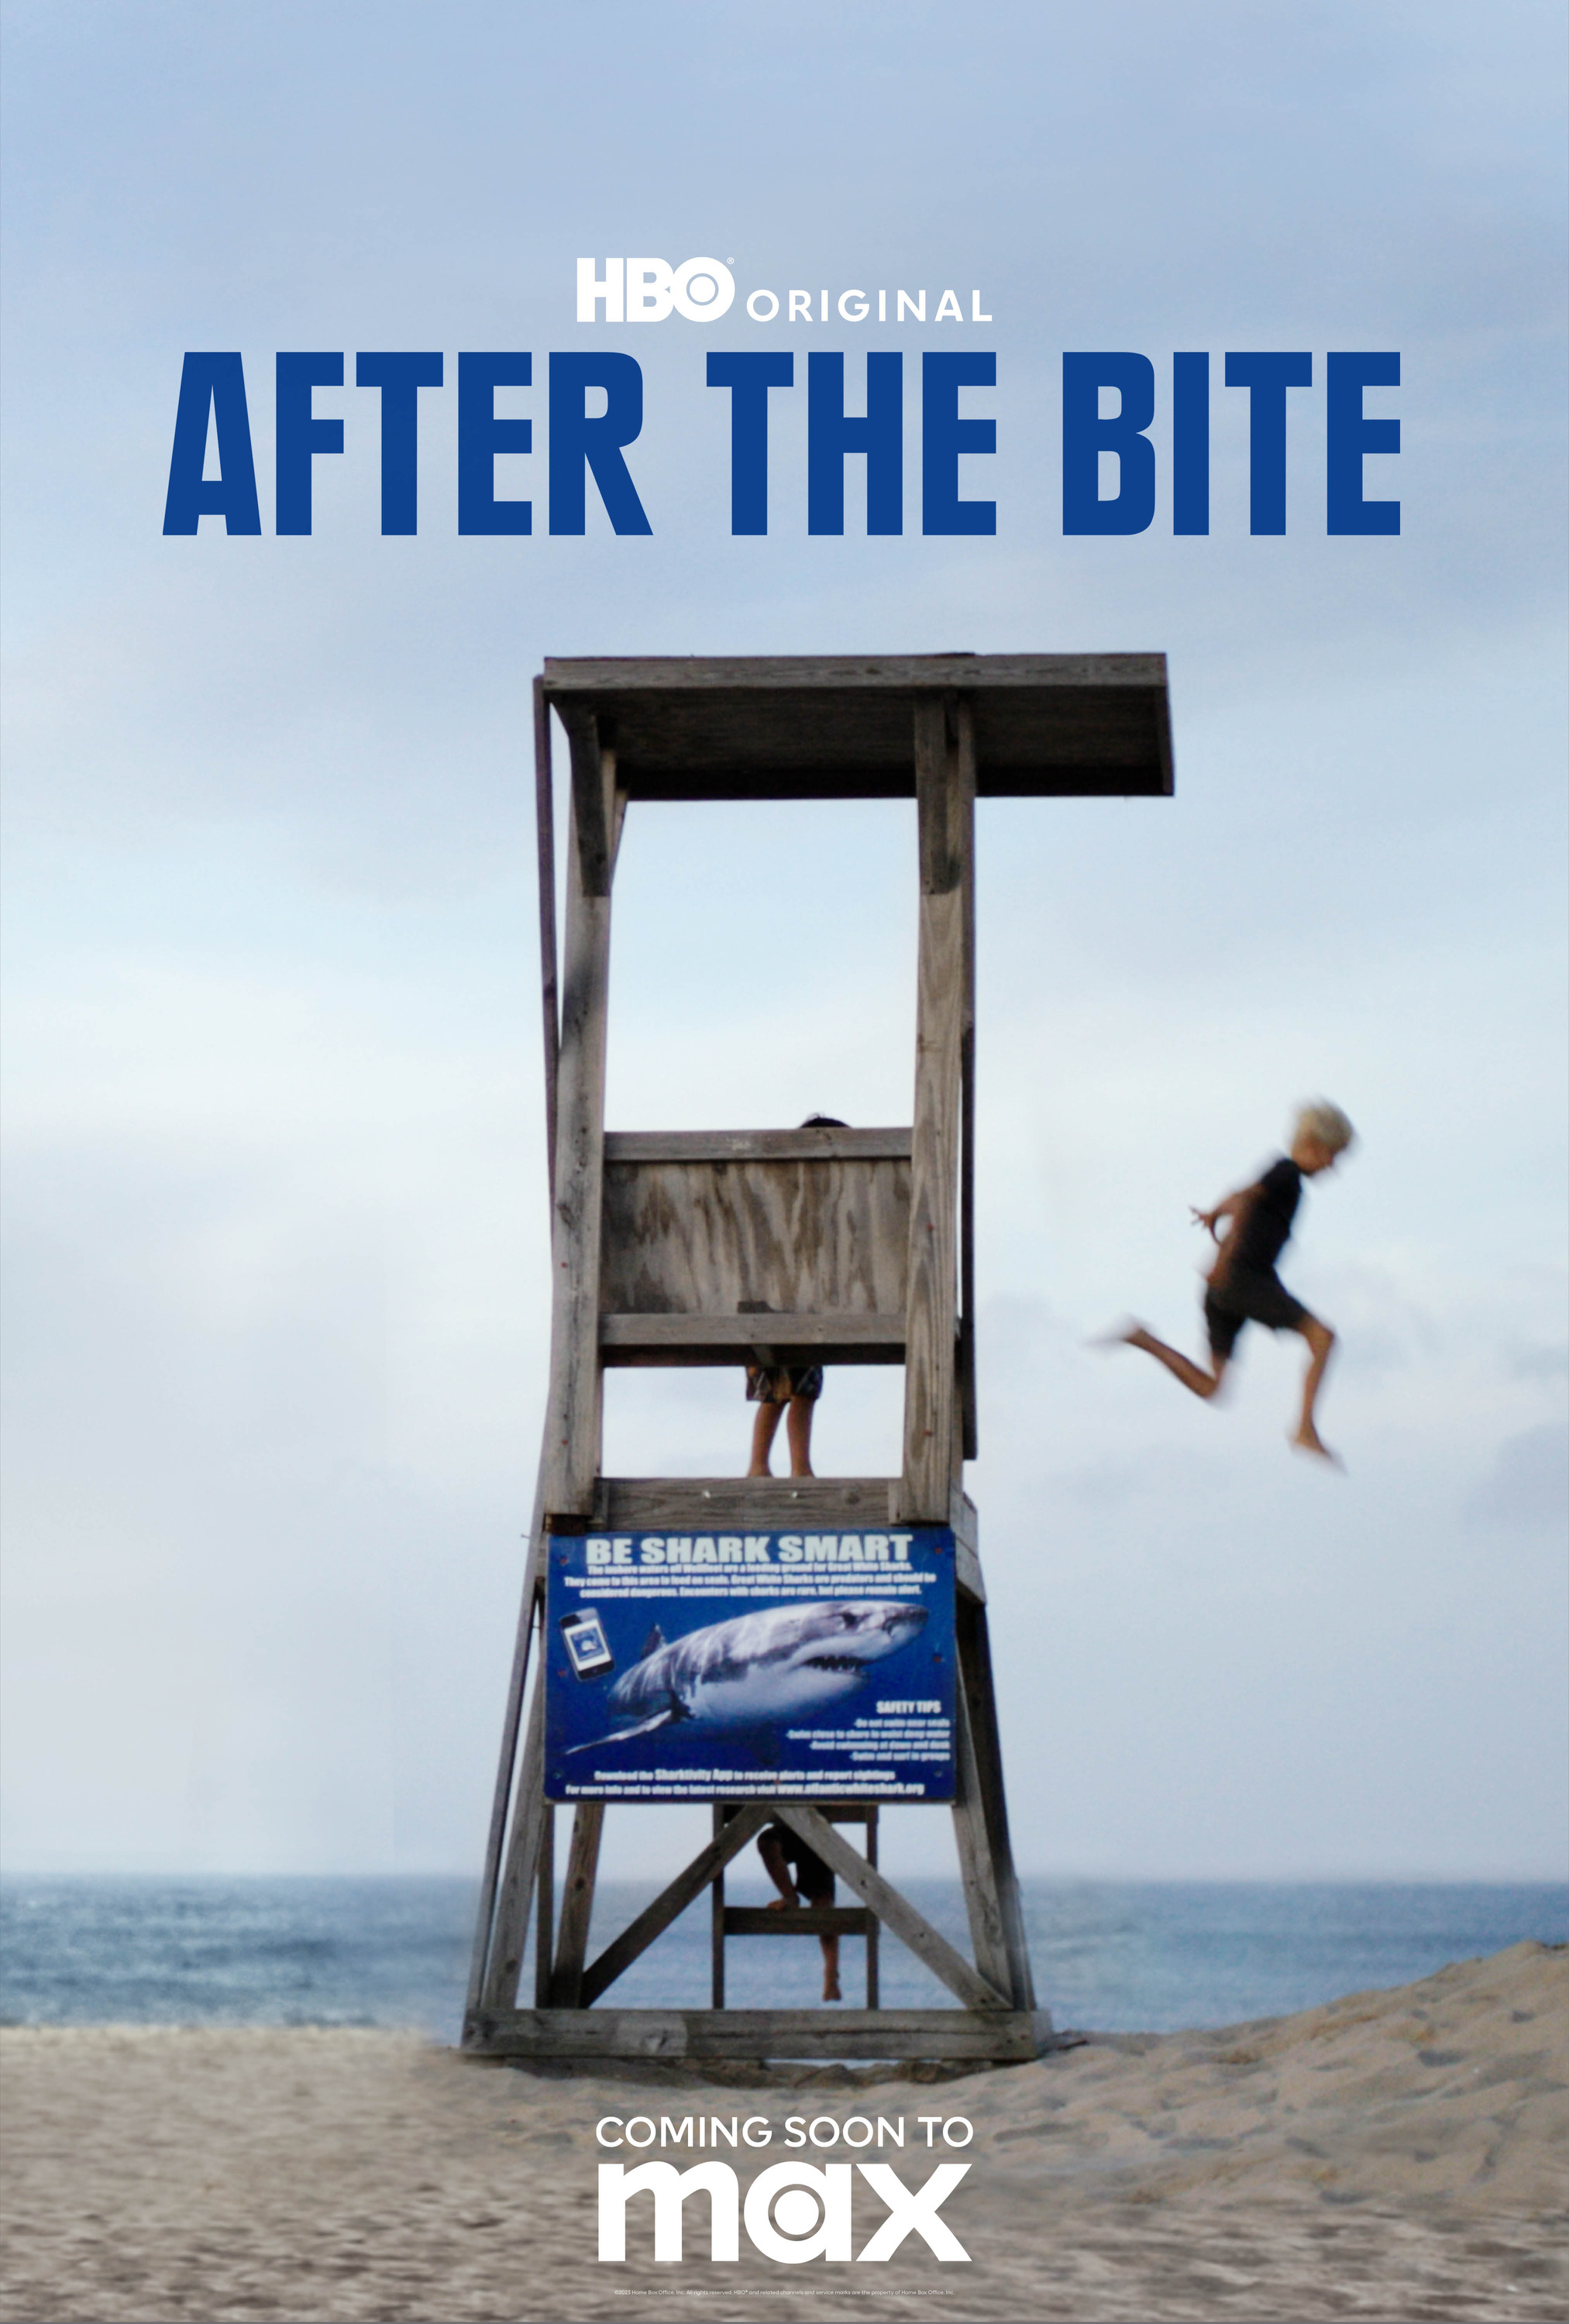 Mega Sized Movie Poster Image for After the Bite (#2 of 2)